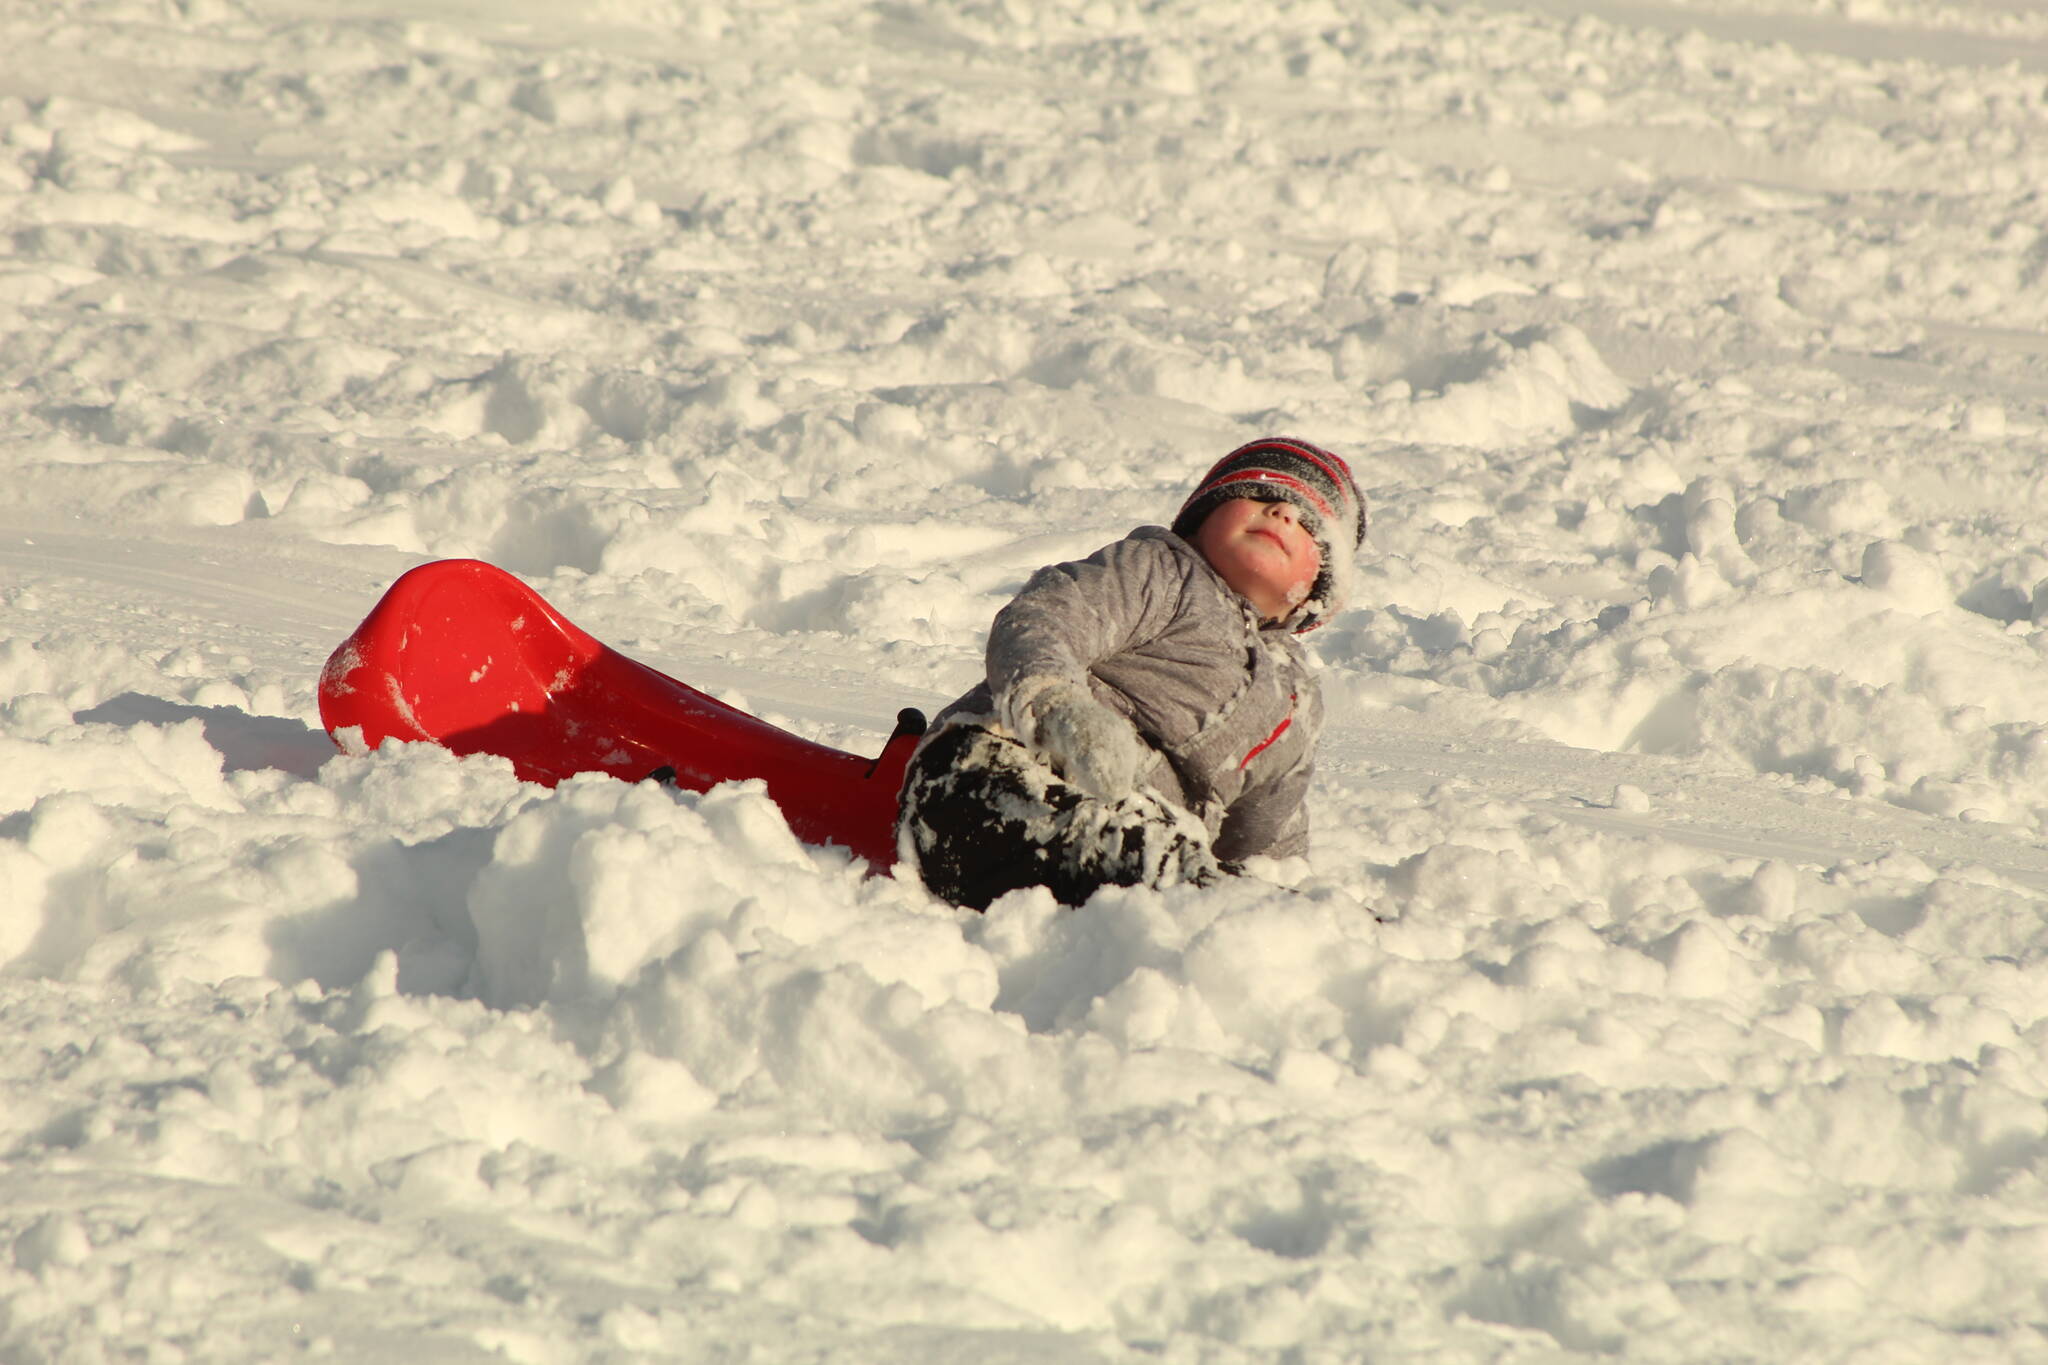 Jackson Frasher, age 3, takes a tumble in the snow while sledding near the Oak Harbor library Tuesday afternoon. (Photo by Karina Andrew/Whidbey News-Times)